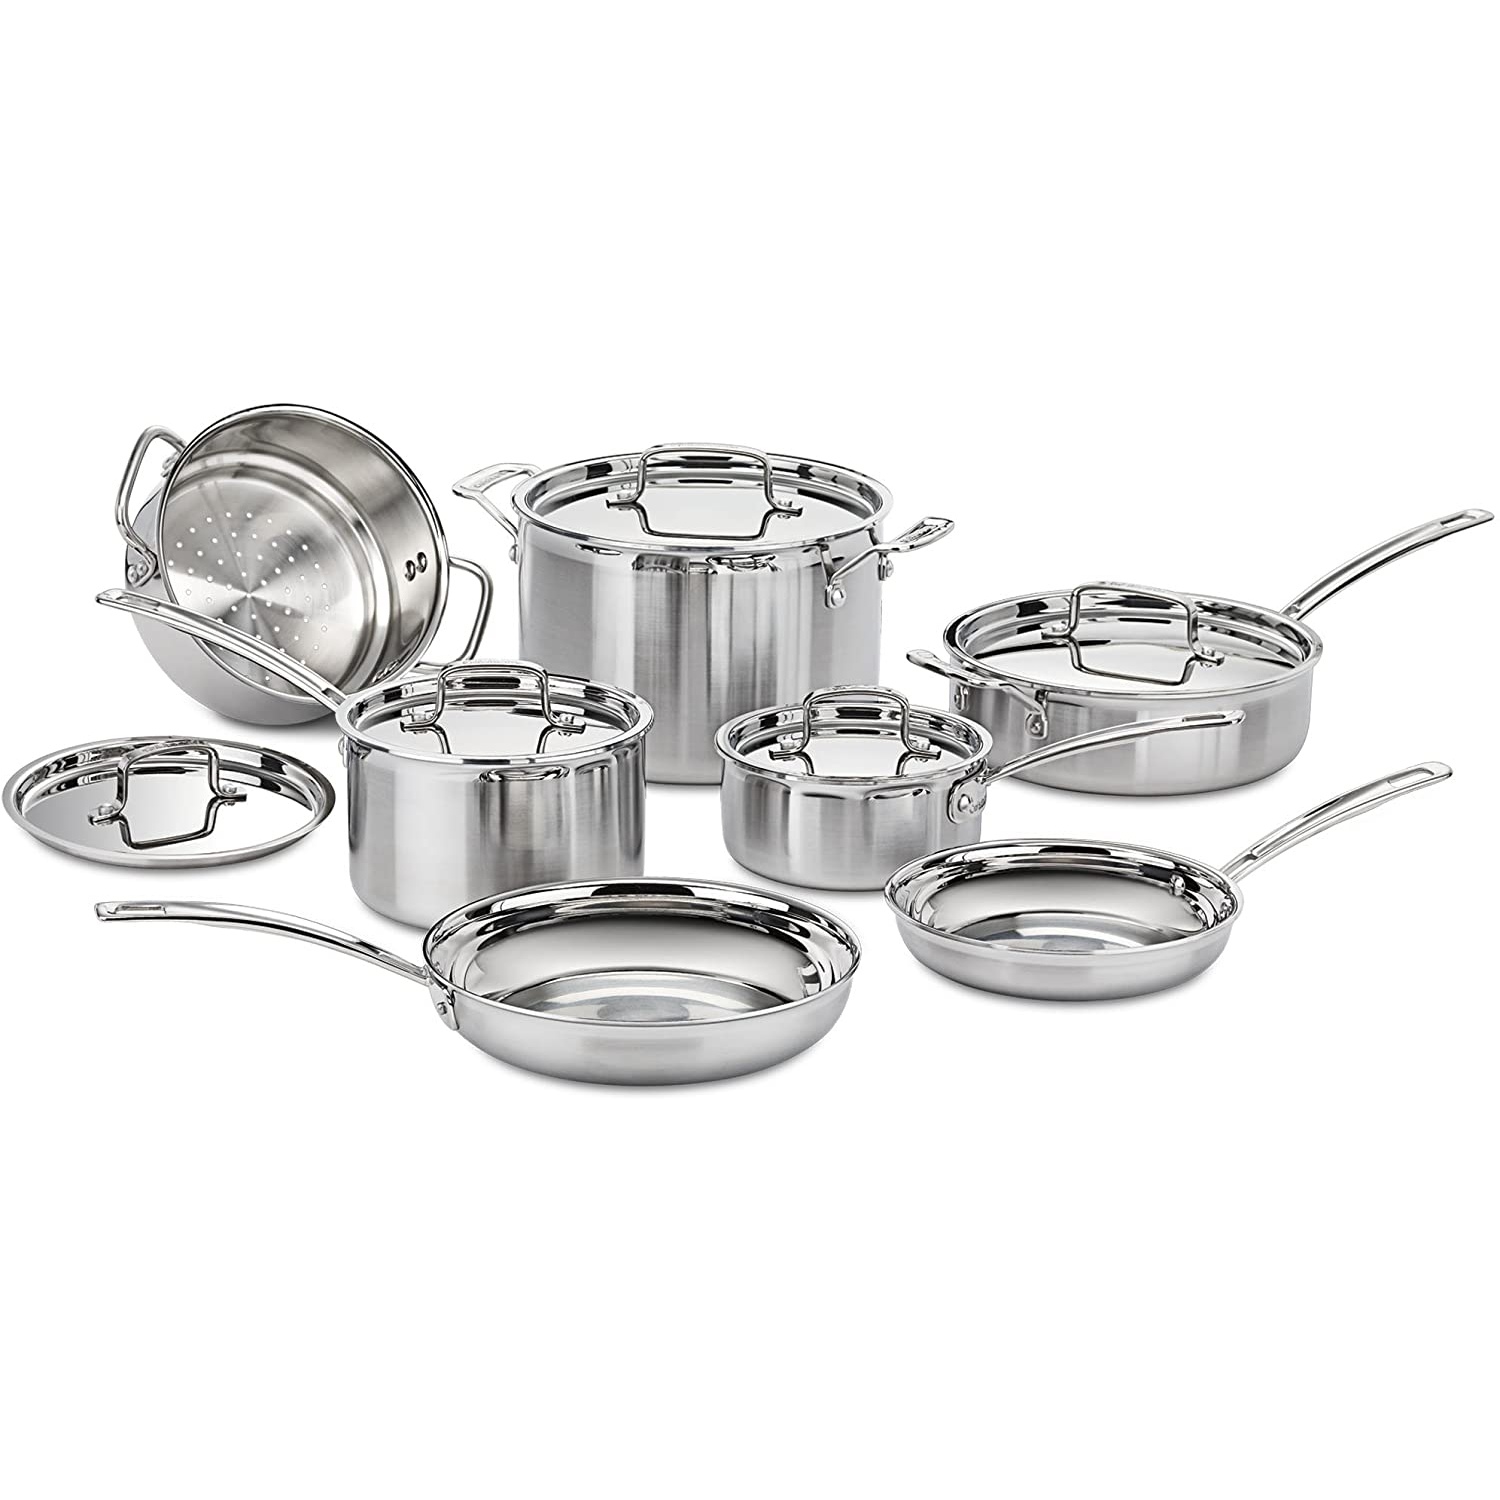 Cuisinart MCP-12N Multiclad Pro Stainless Steel 12-Piece Cookware